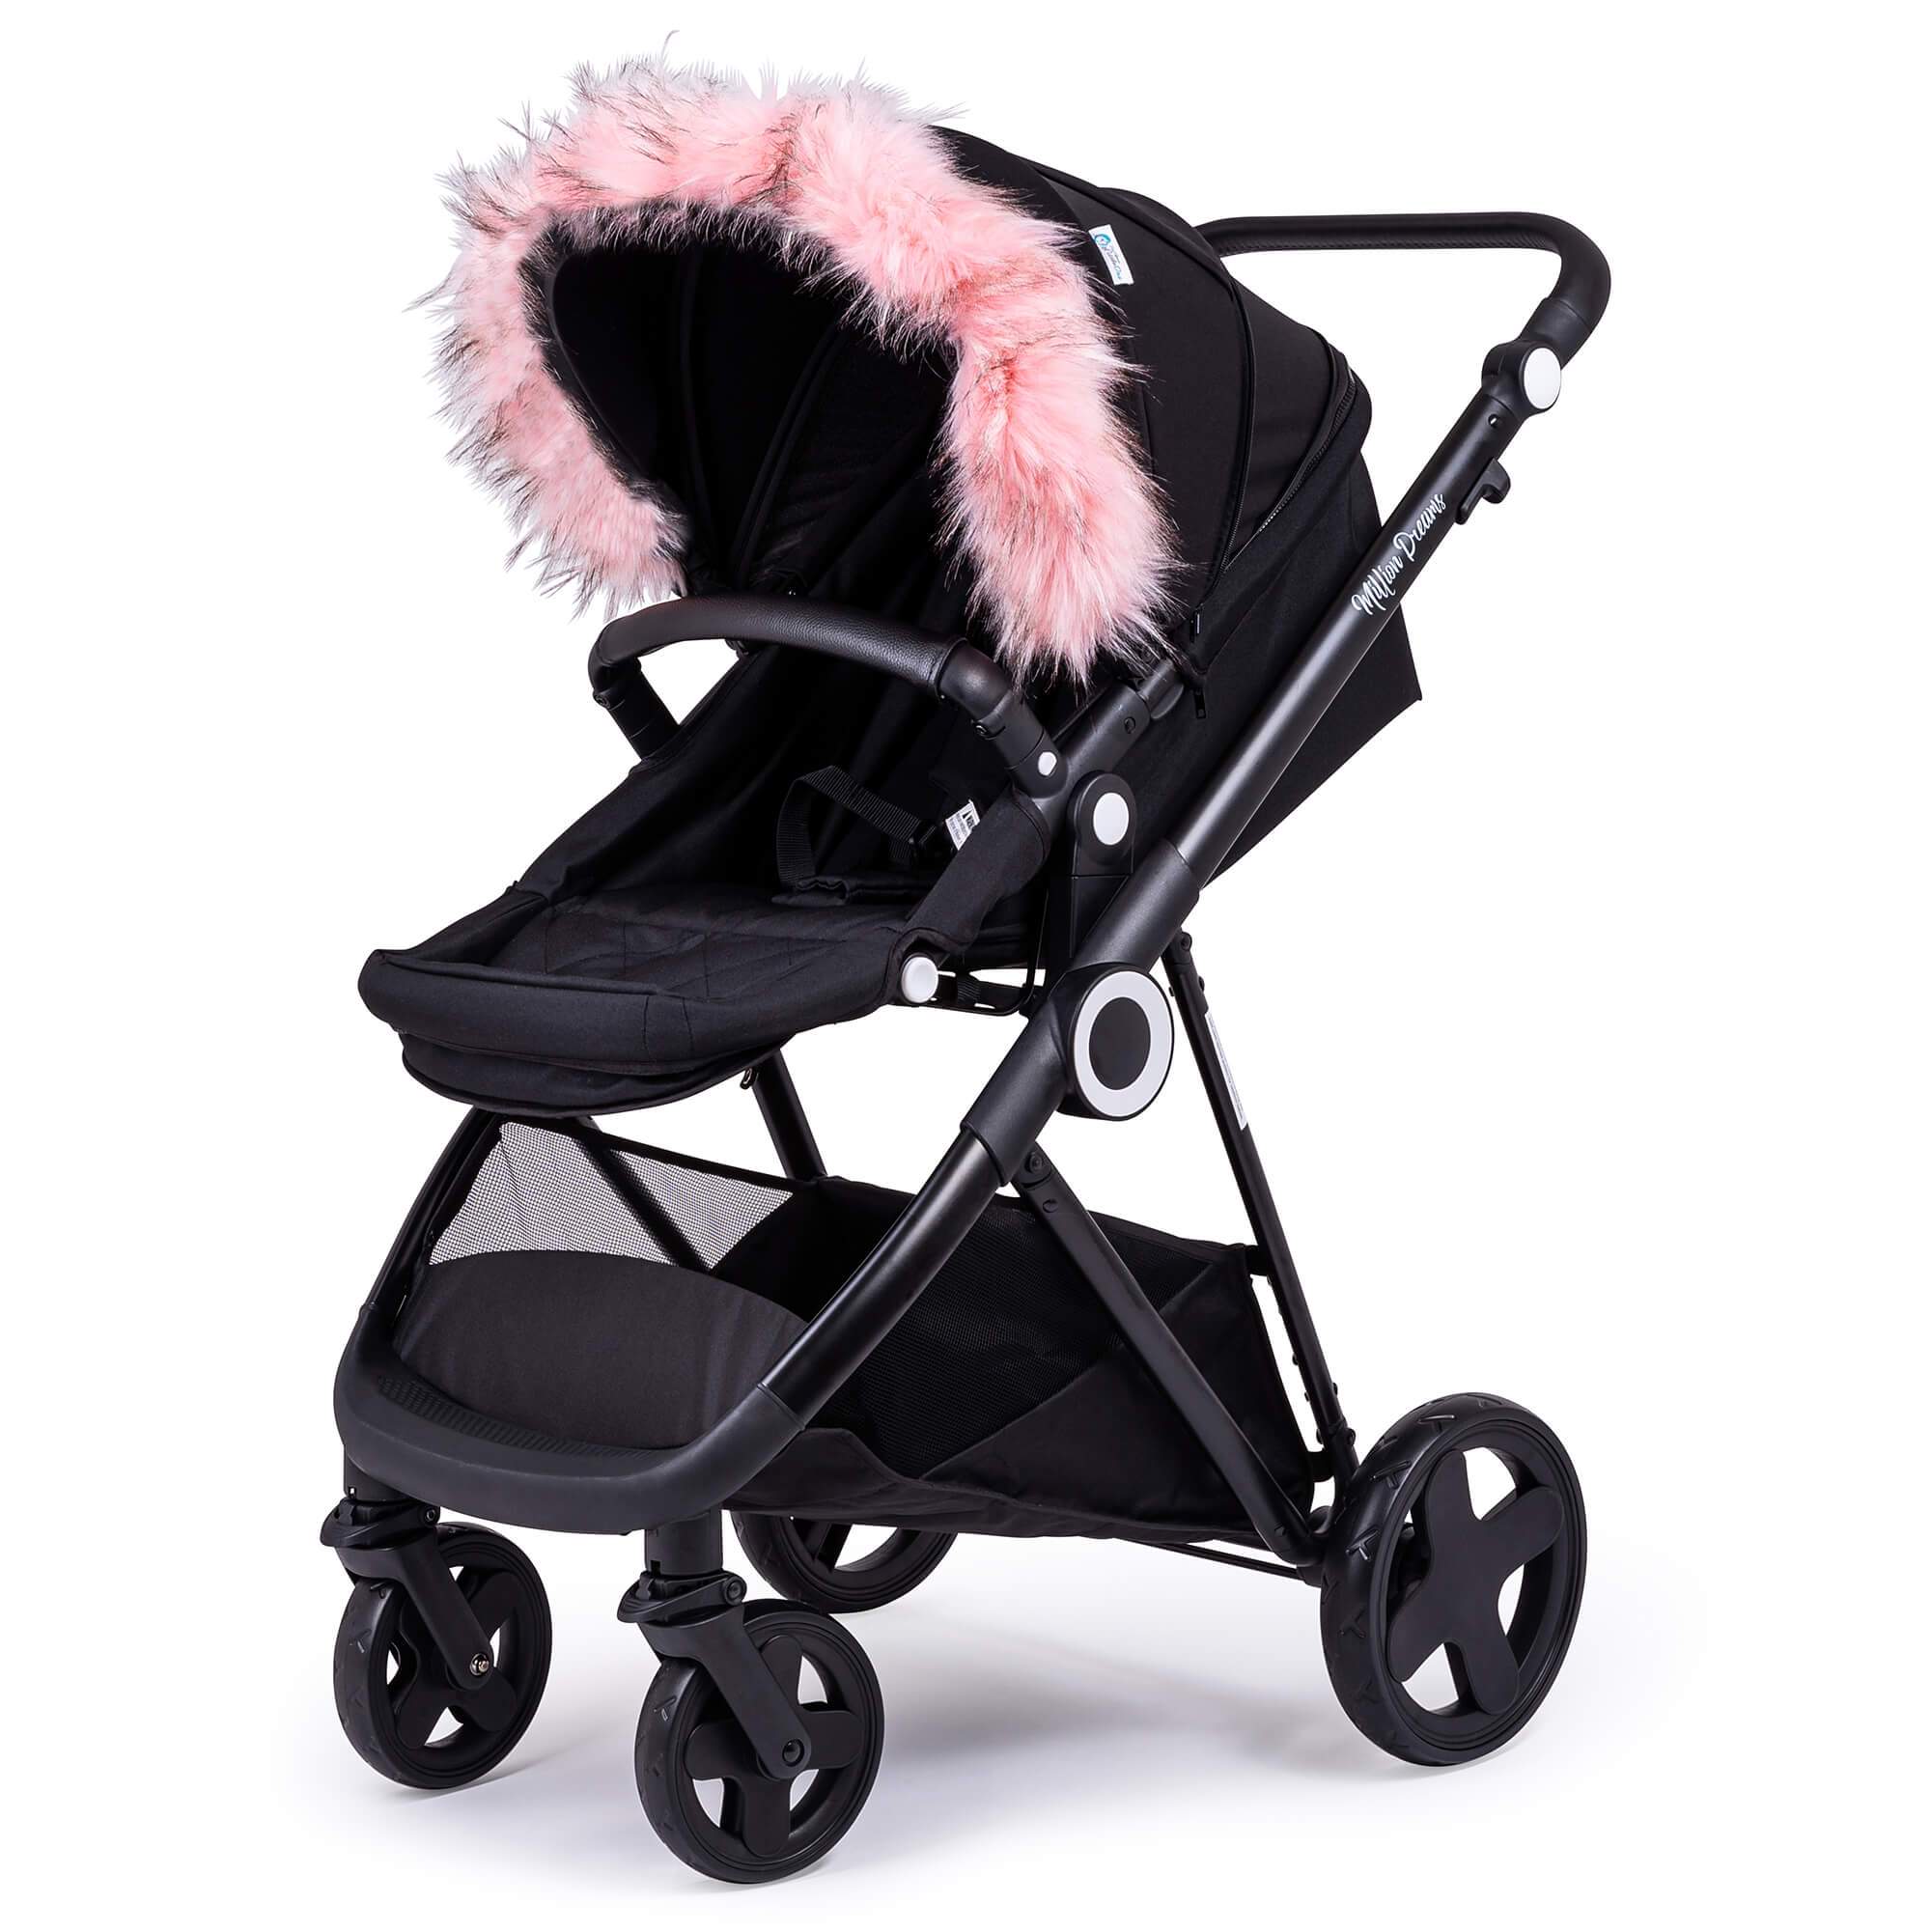 Pram Fur Hood Trim Attachment for Pushchair Compatible with Baby Jogger - Light Pink / Fits All Models | For Your Little One